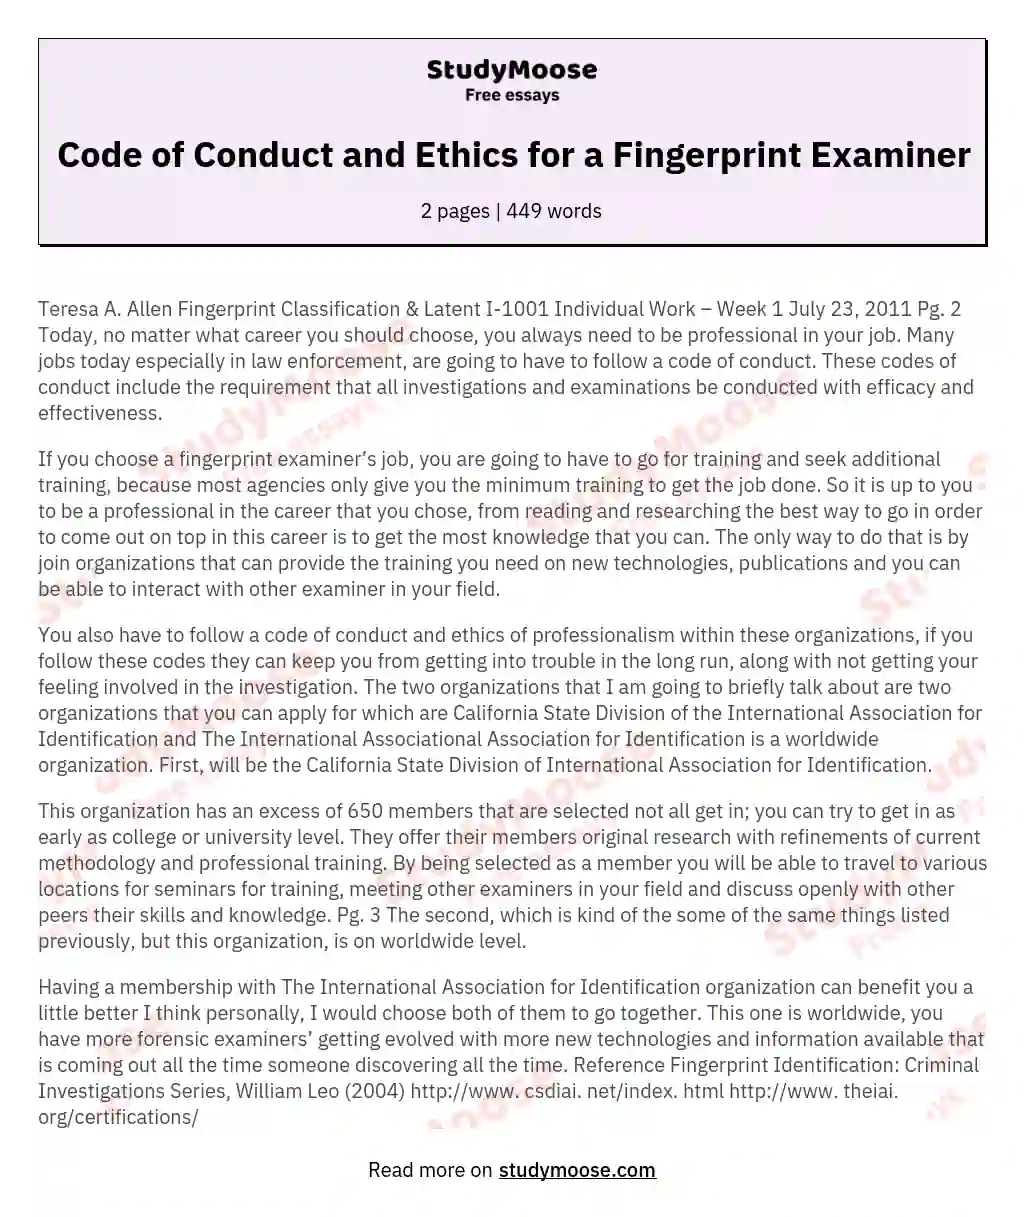 Code of Conduct and Ethics for a Fingerprint Examiner